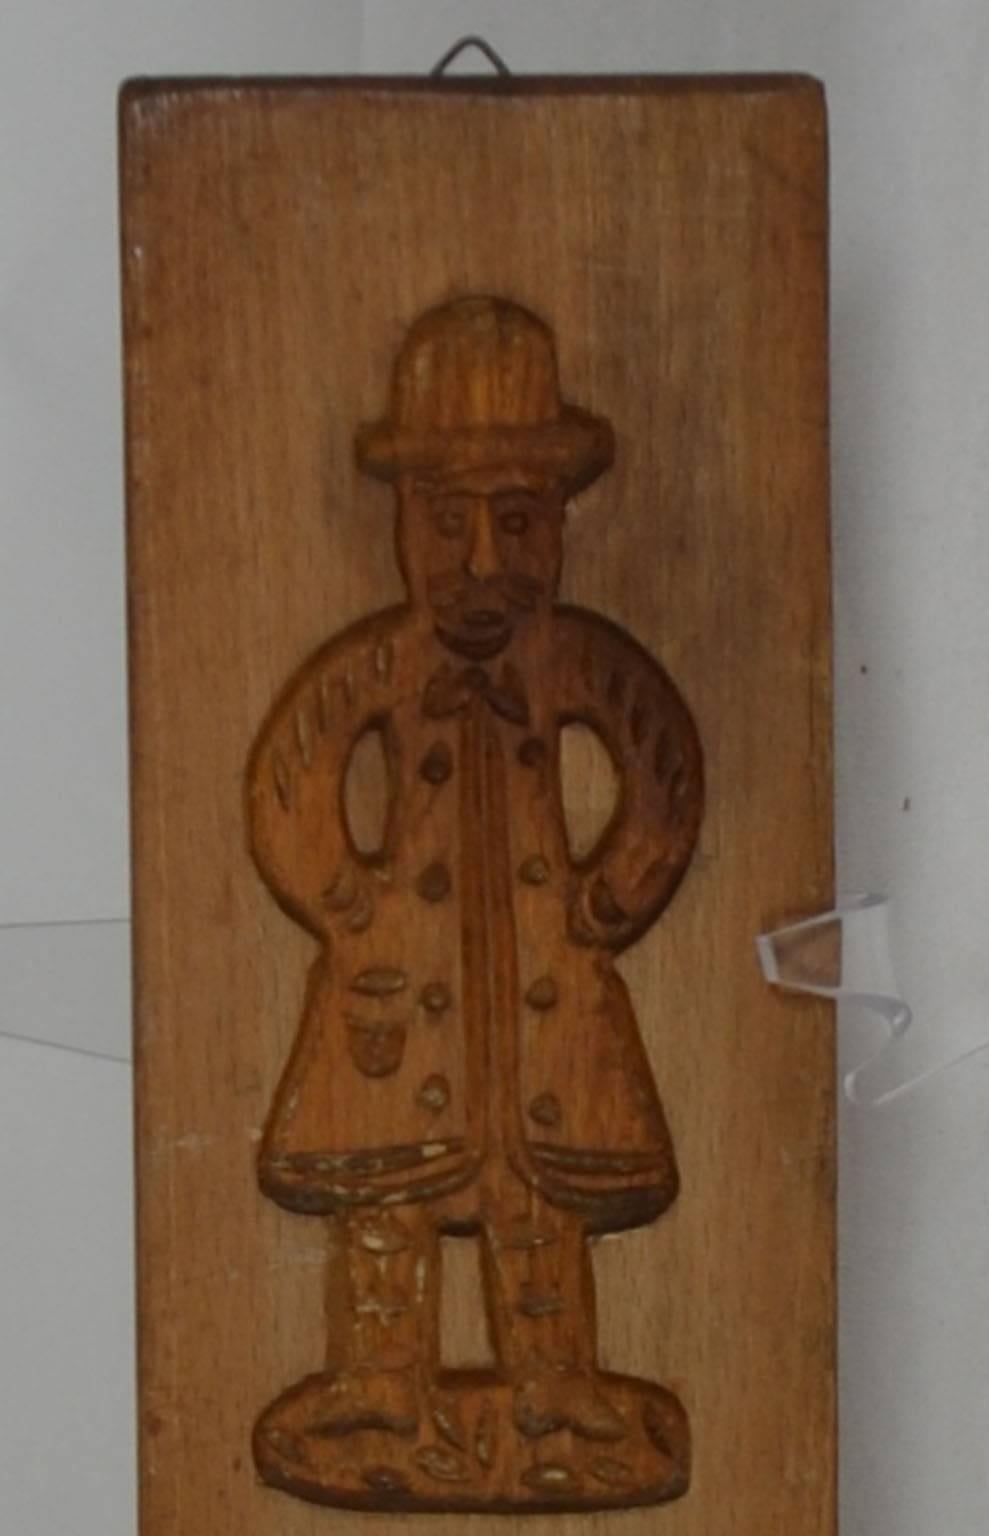 Double-sided wooden gingerbread mold, one side (two male figures) other side, (five small figures, leaf, heart and other shapes).